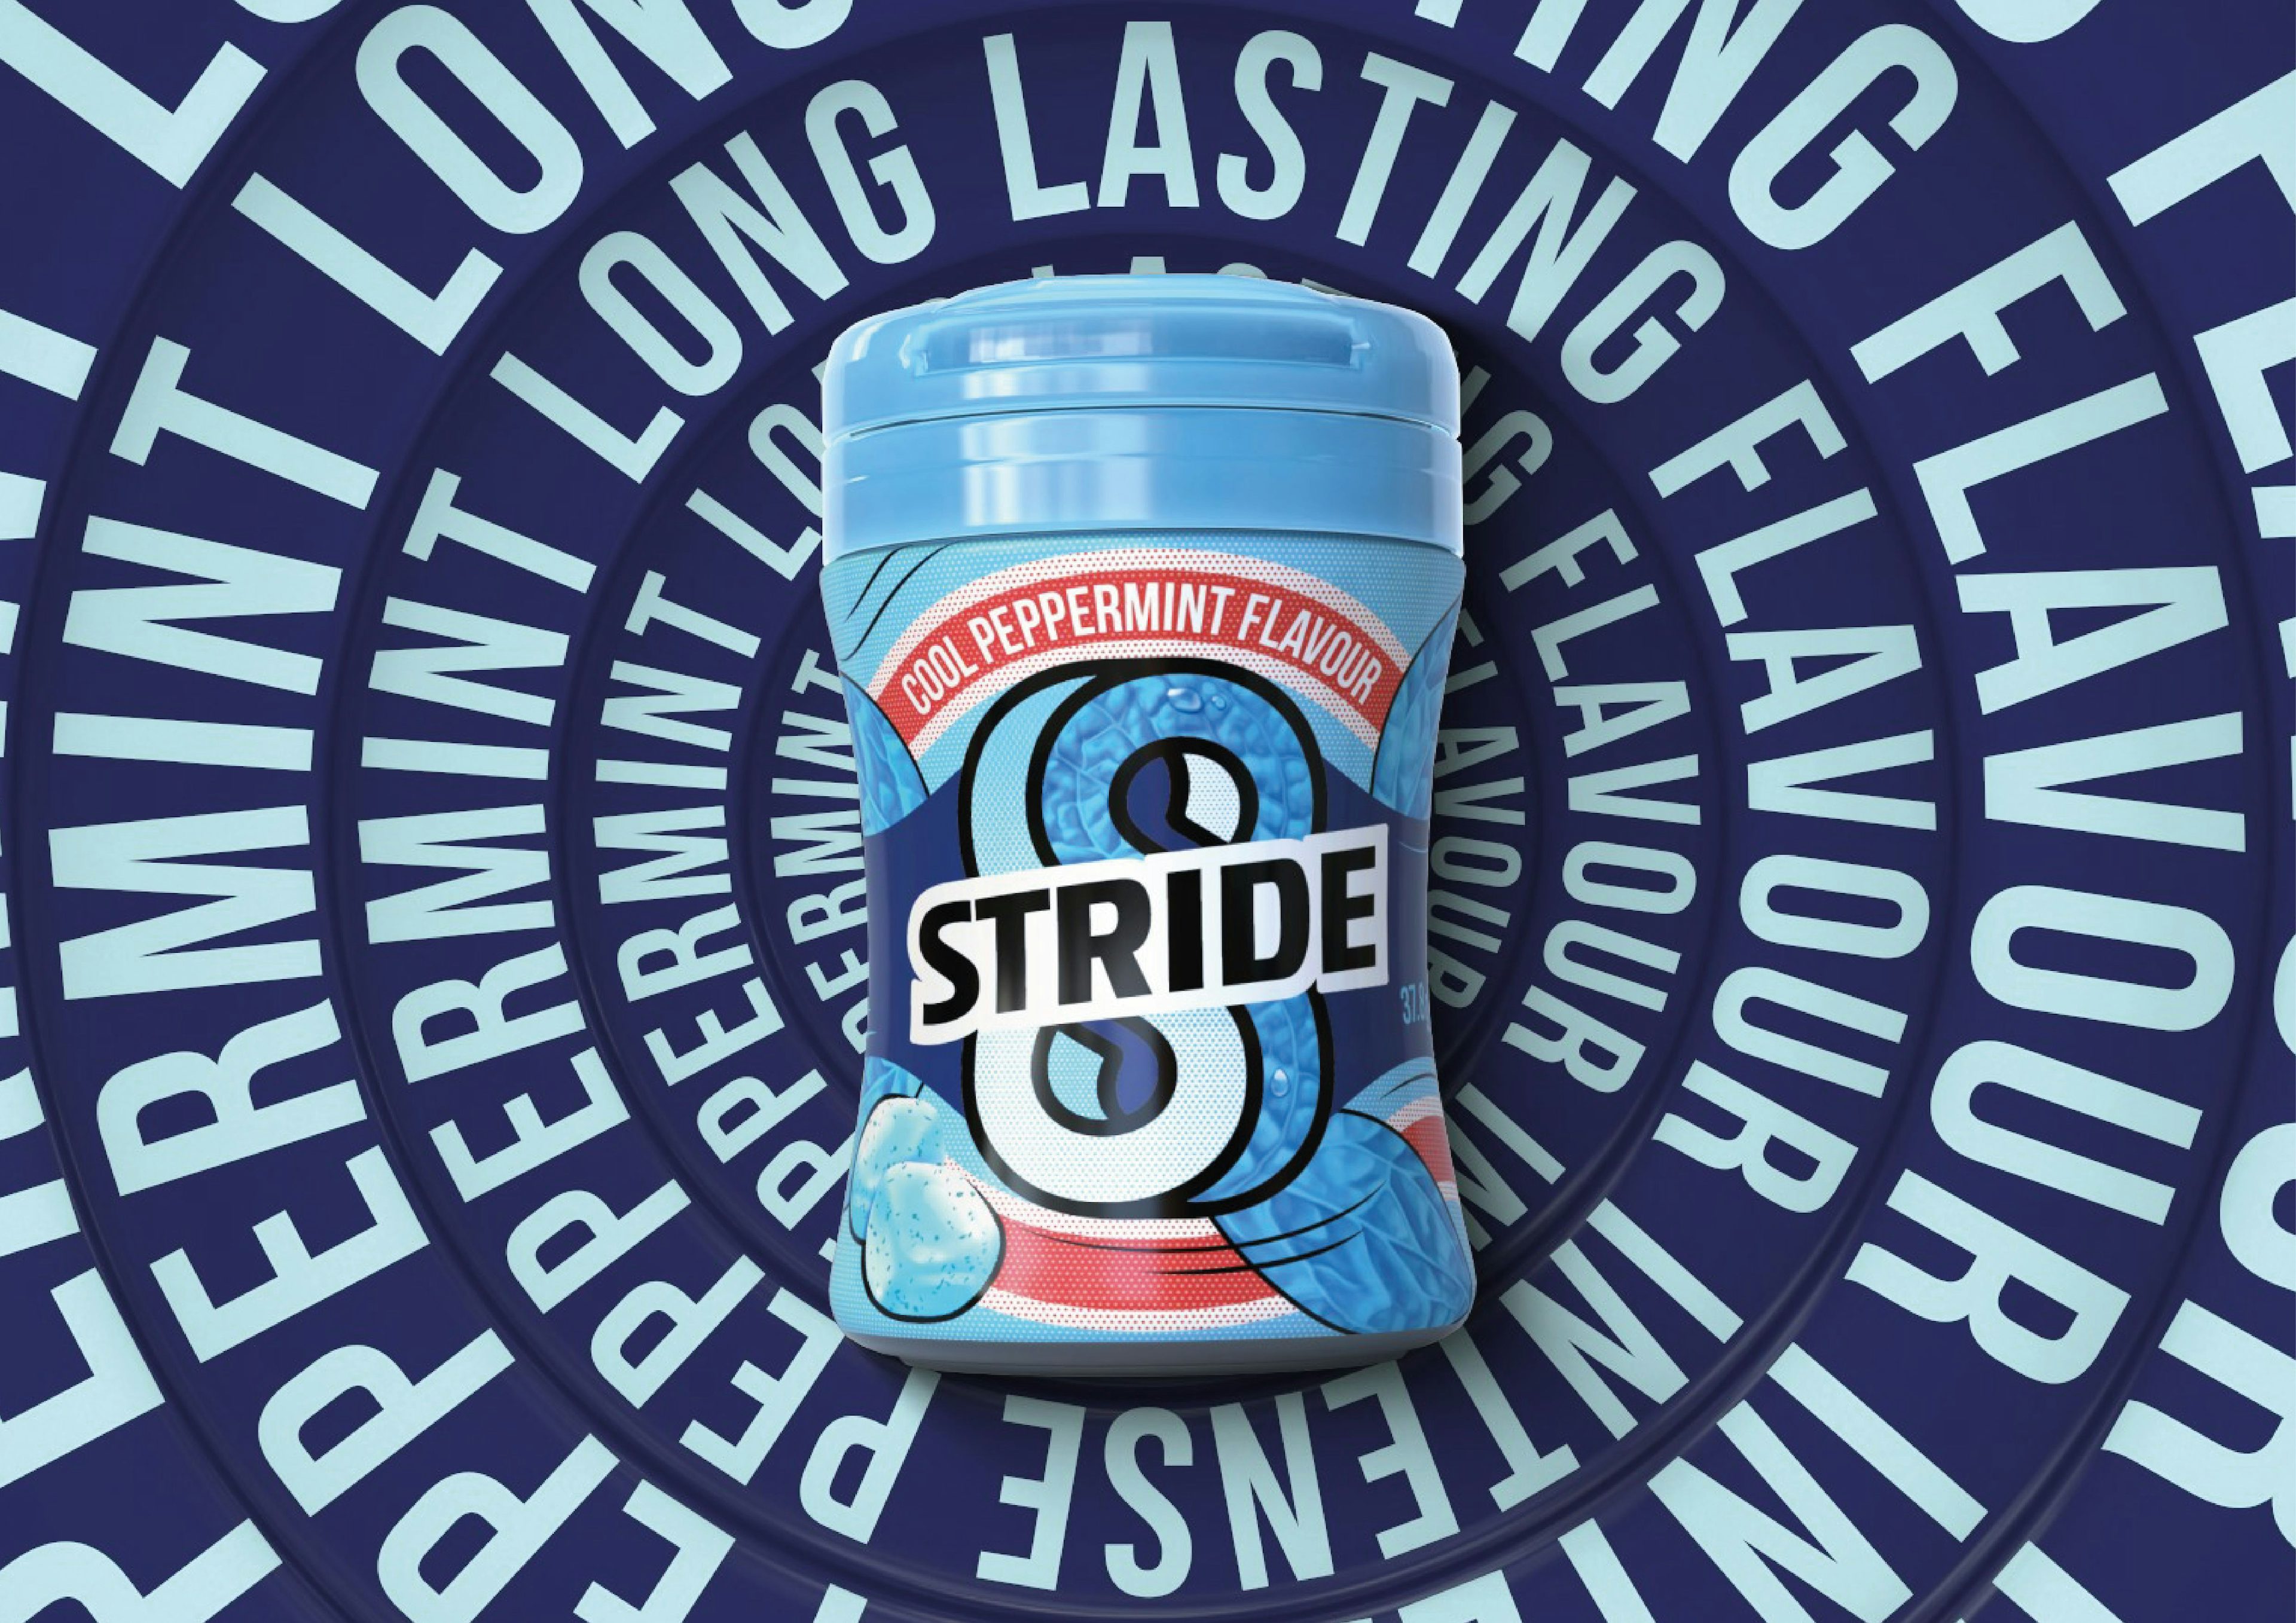 Thumbnail image for project: Stride Gum